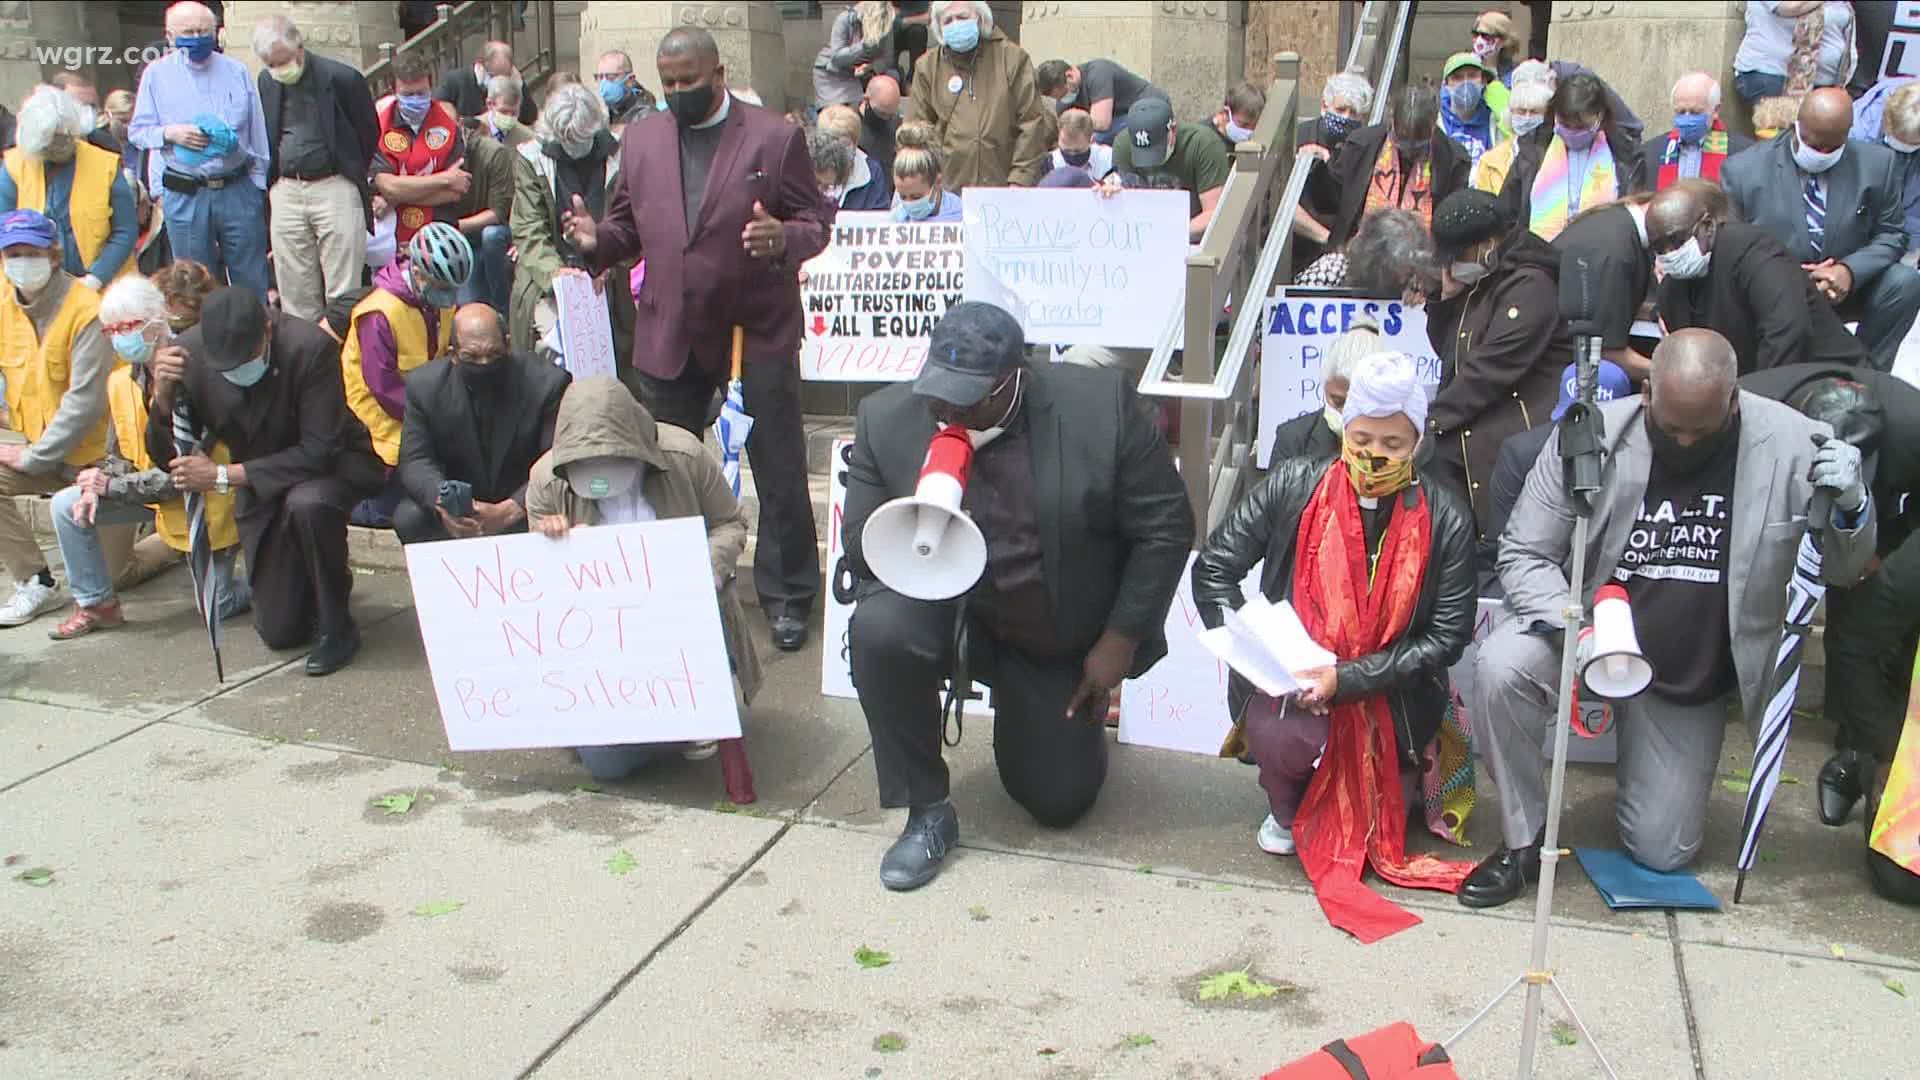 Wednesday's rally was organized by Voice Buffalo, a community activism group.